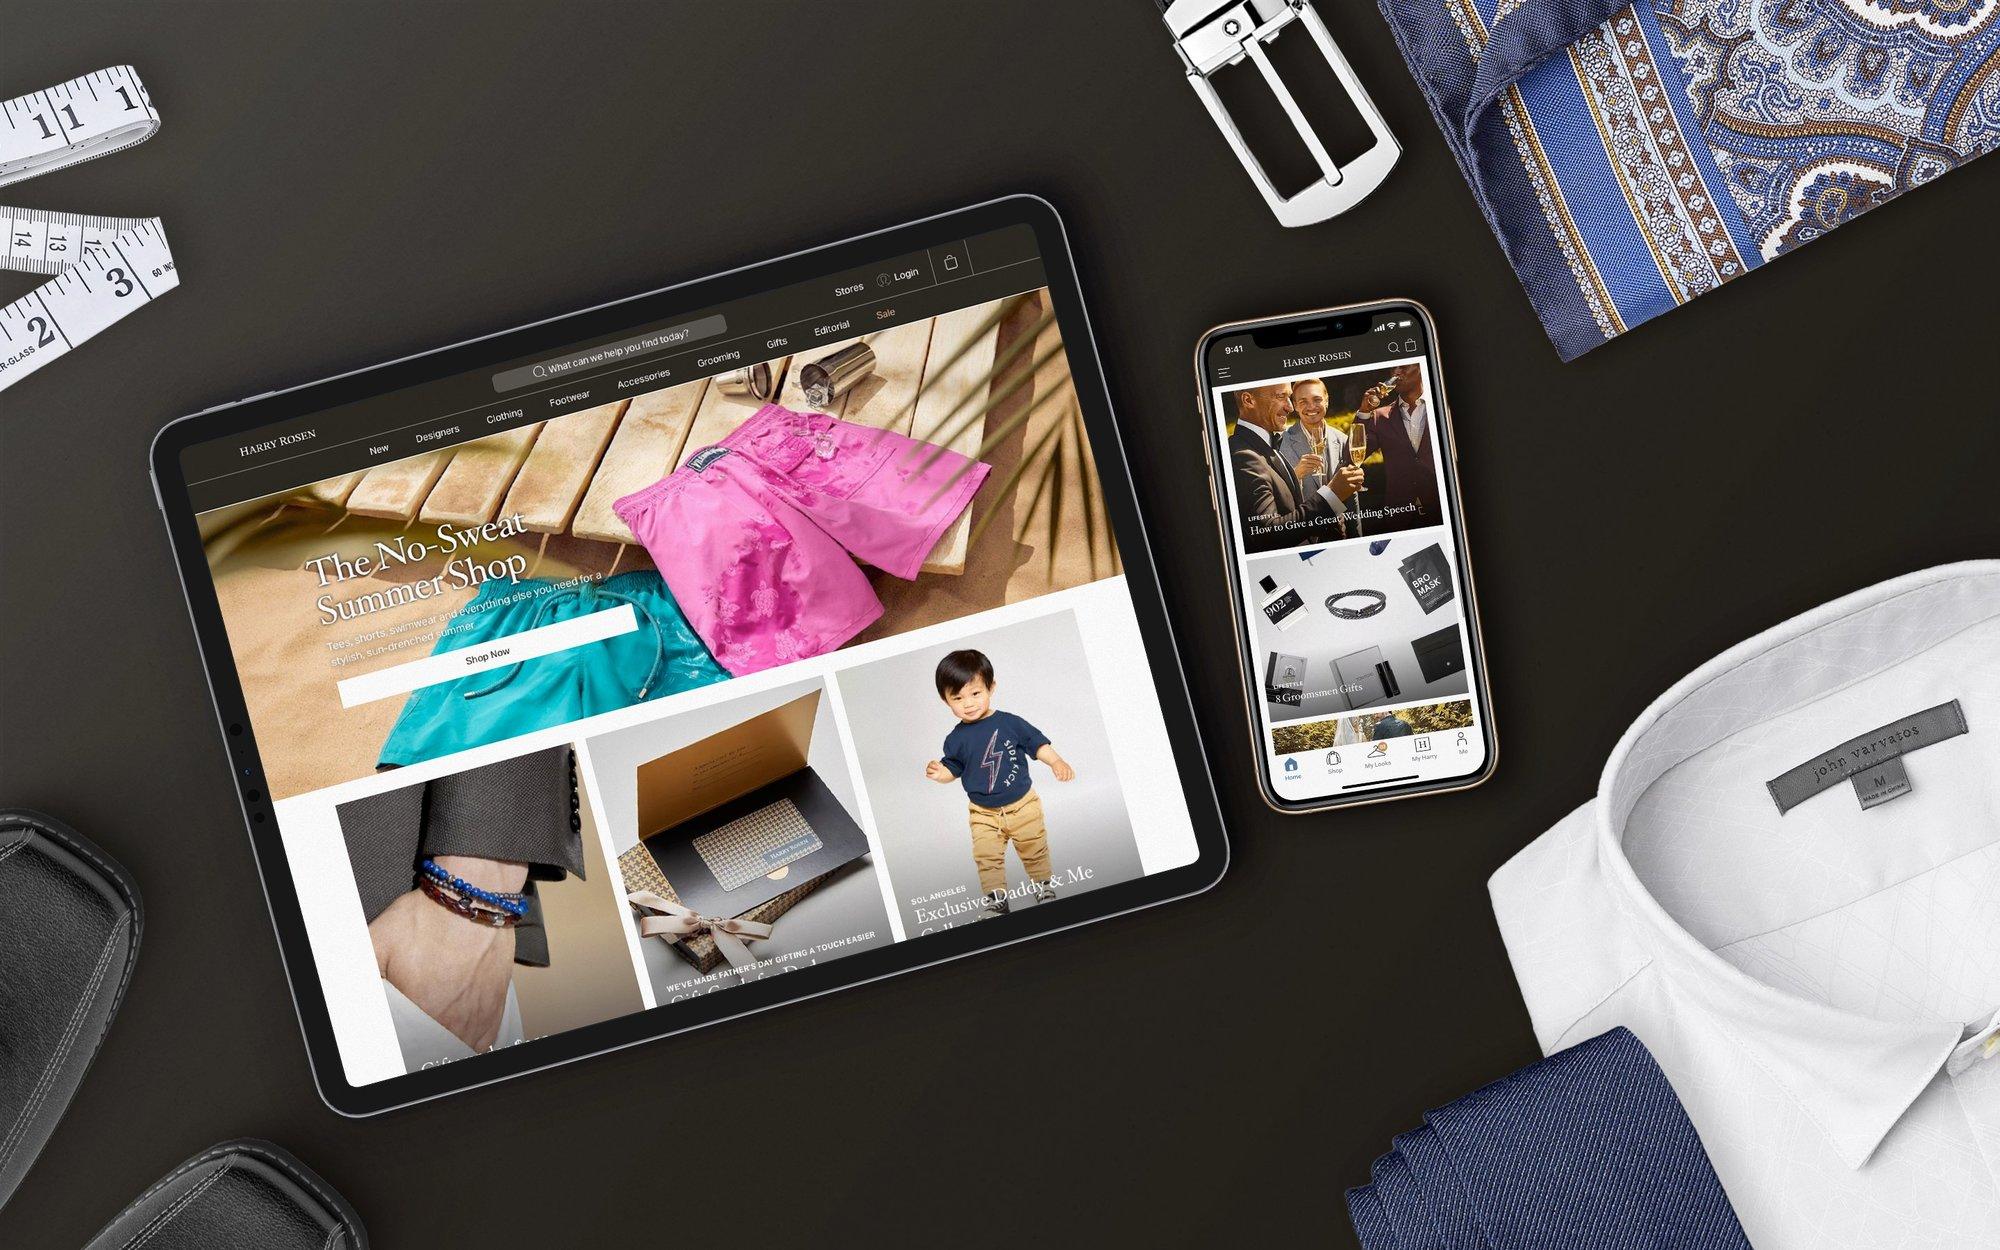 Photograph of tabletop with various menswear clothing items scattered around the edges with an iPad and iphone centered displaying the Harry Rosen website.